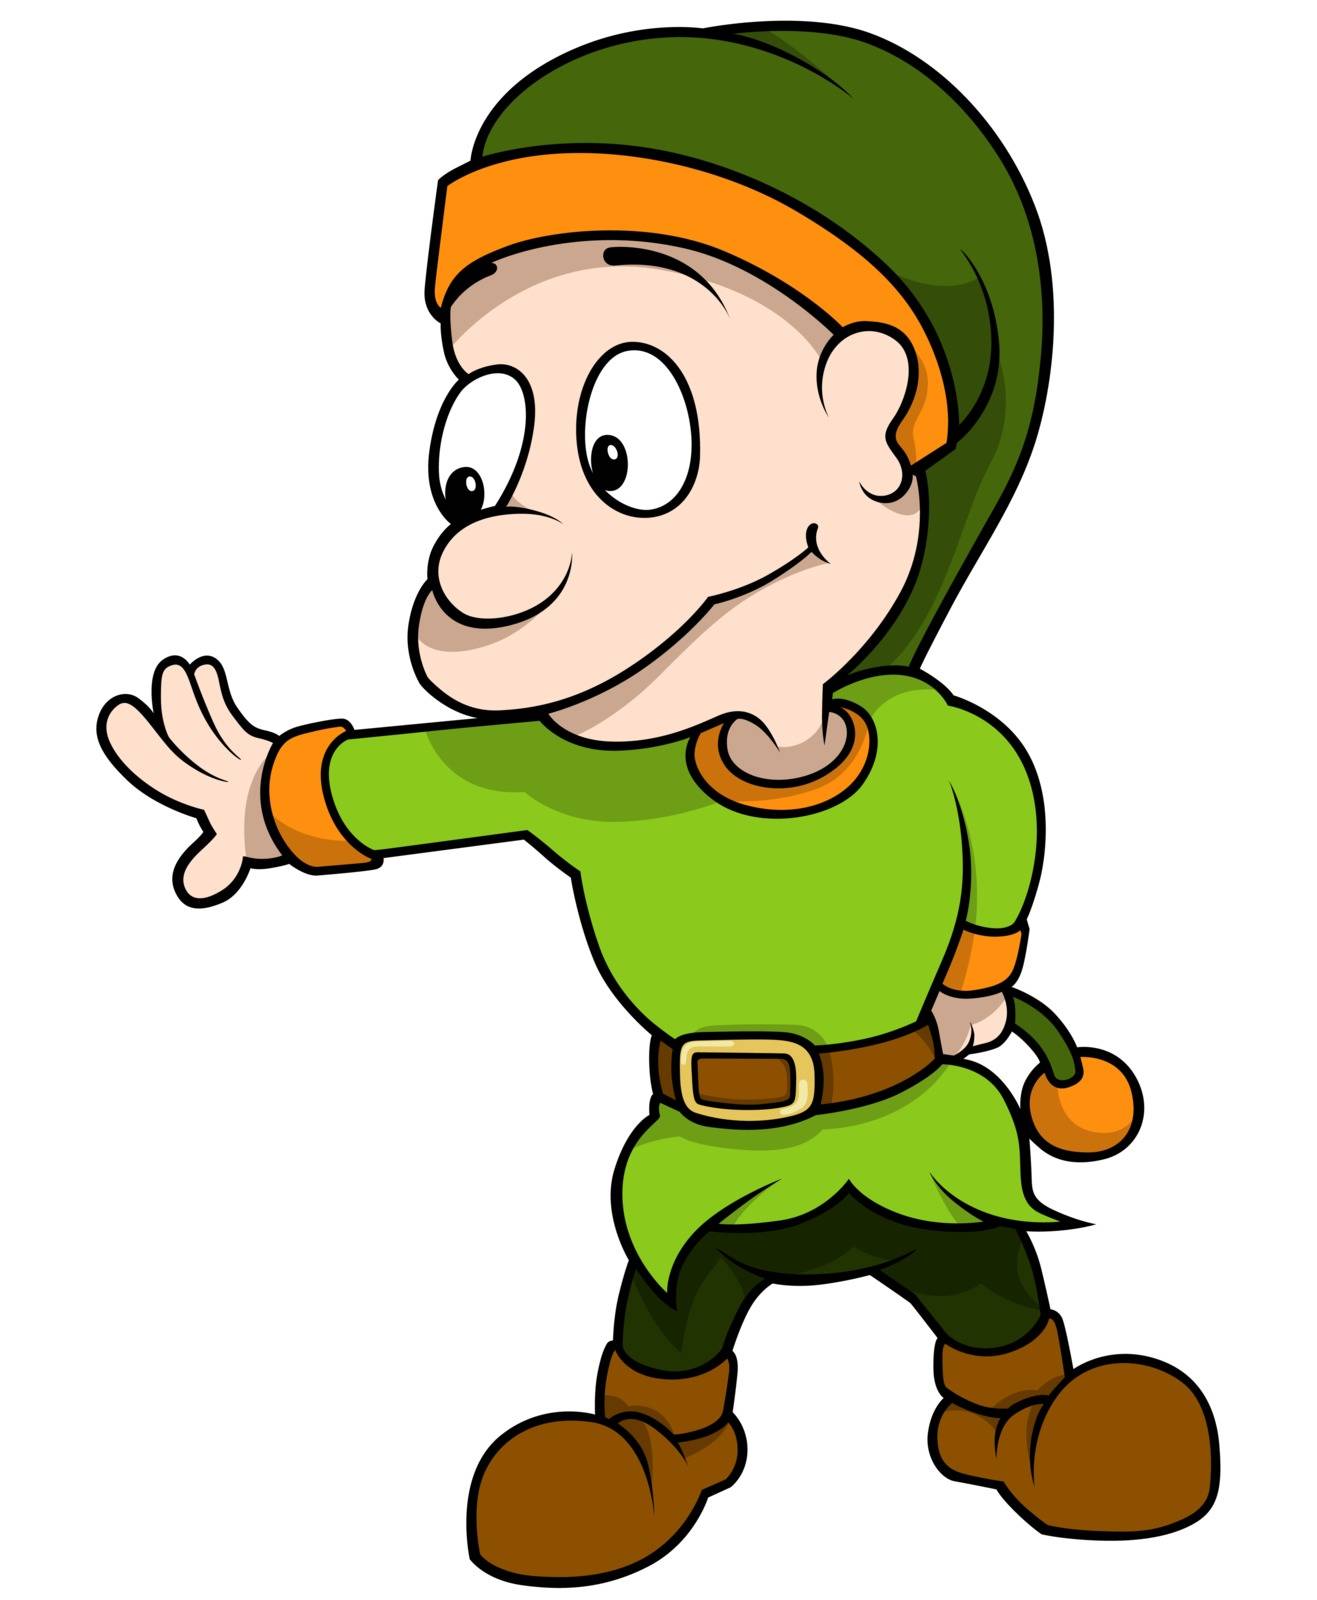 Green Dwarf Leaning - Colored Cartoon Illustration, Vector